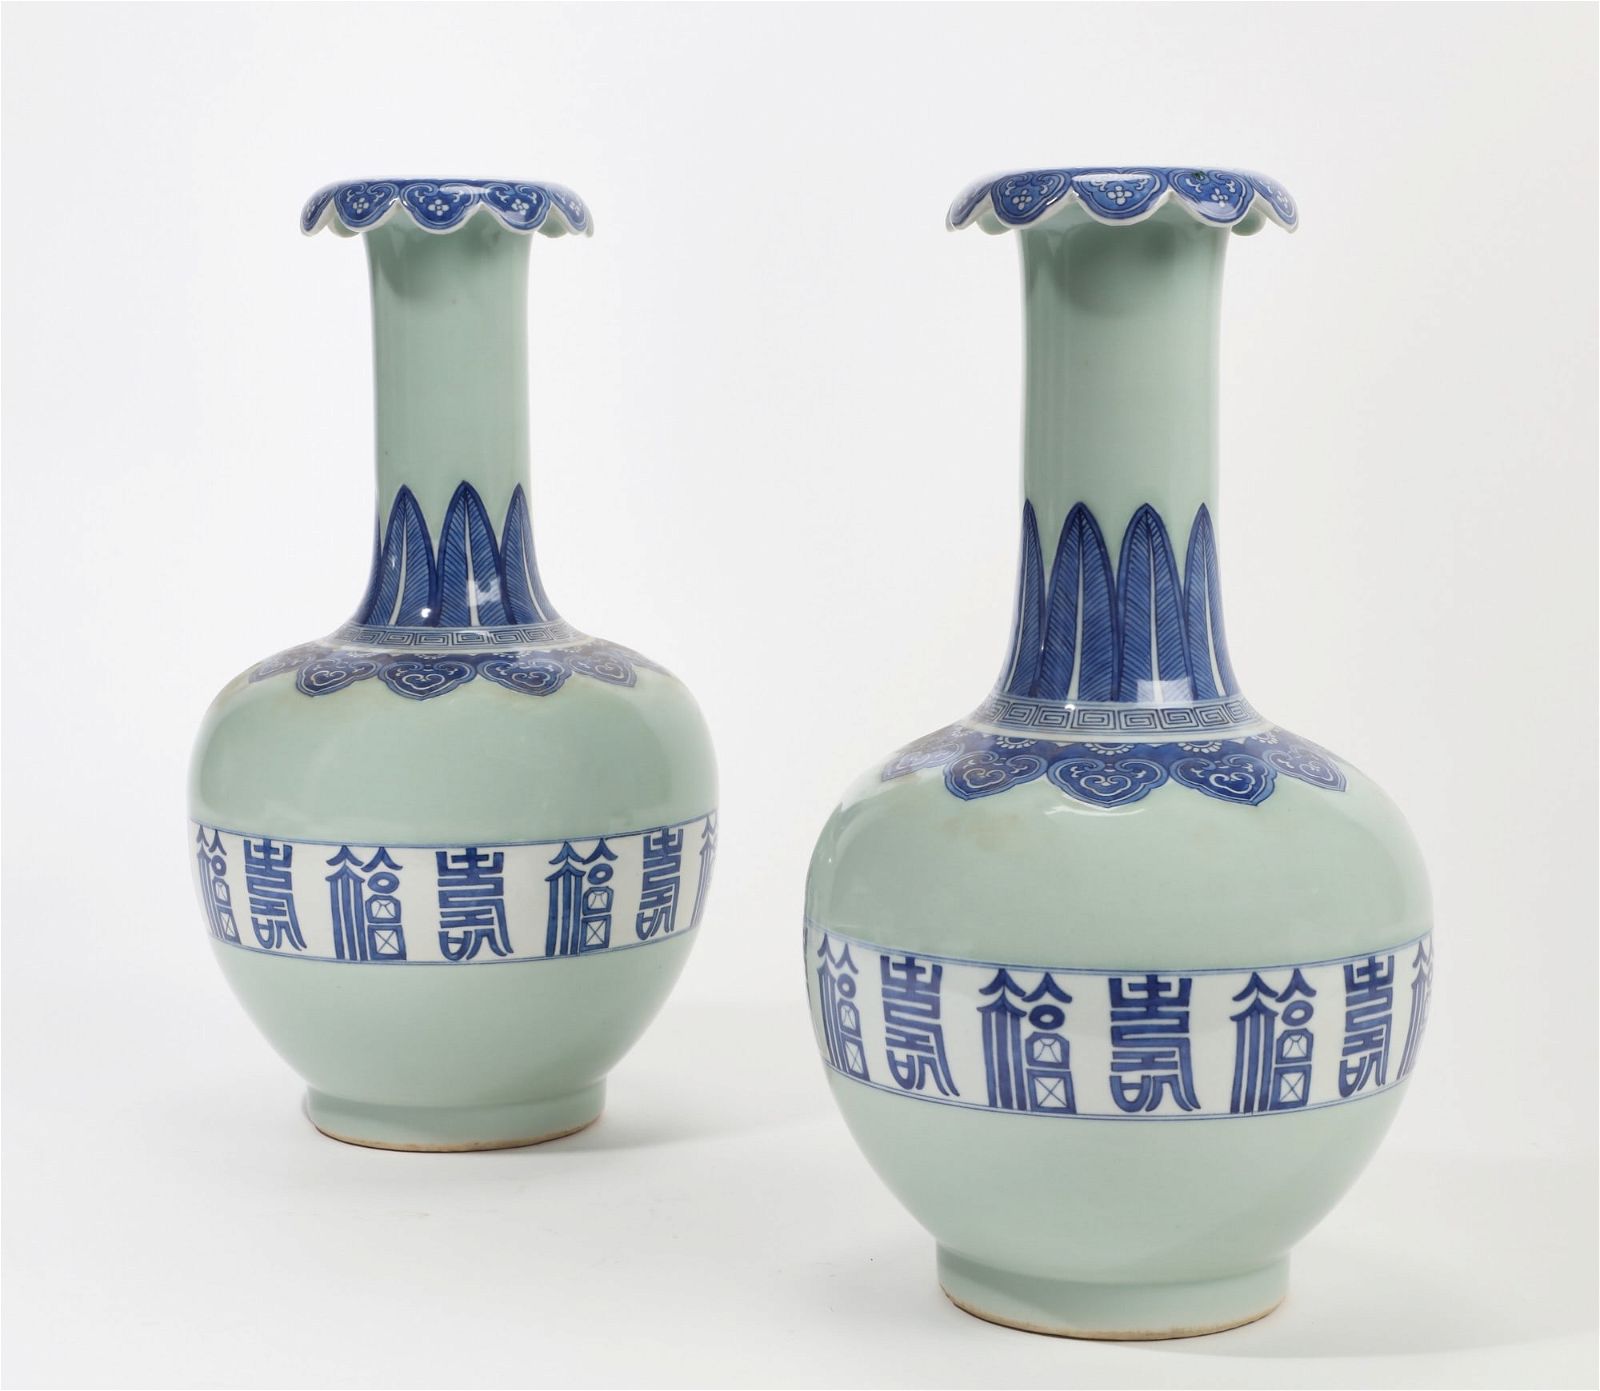 PAIR OF CHINESE CELADON AND BLUE